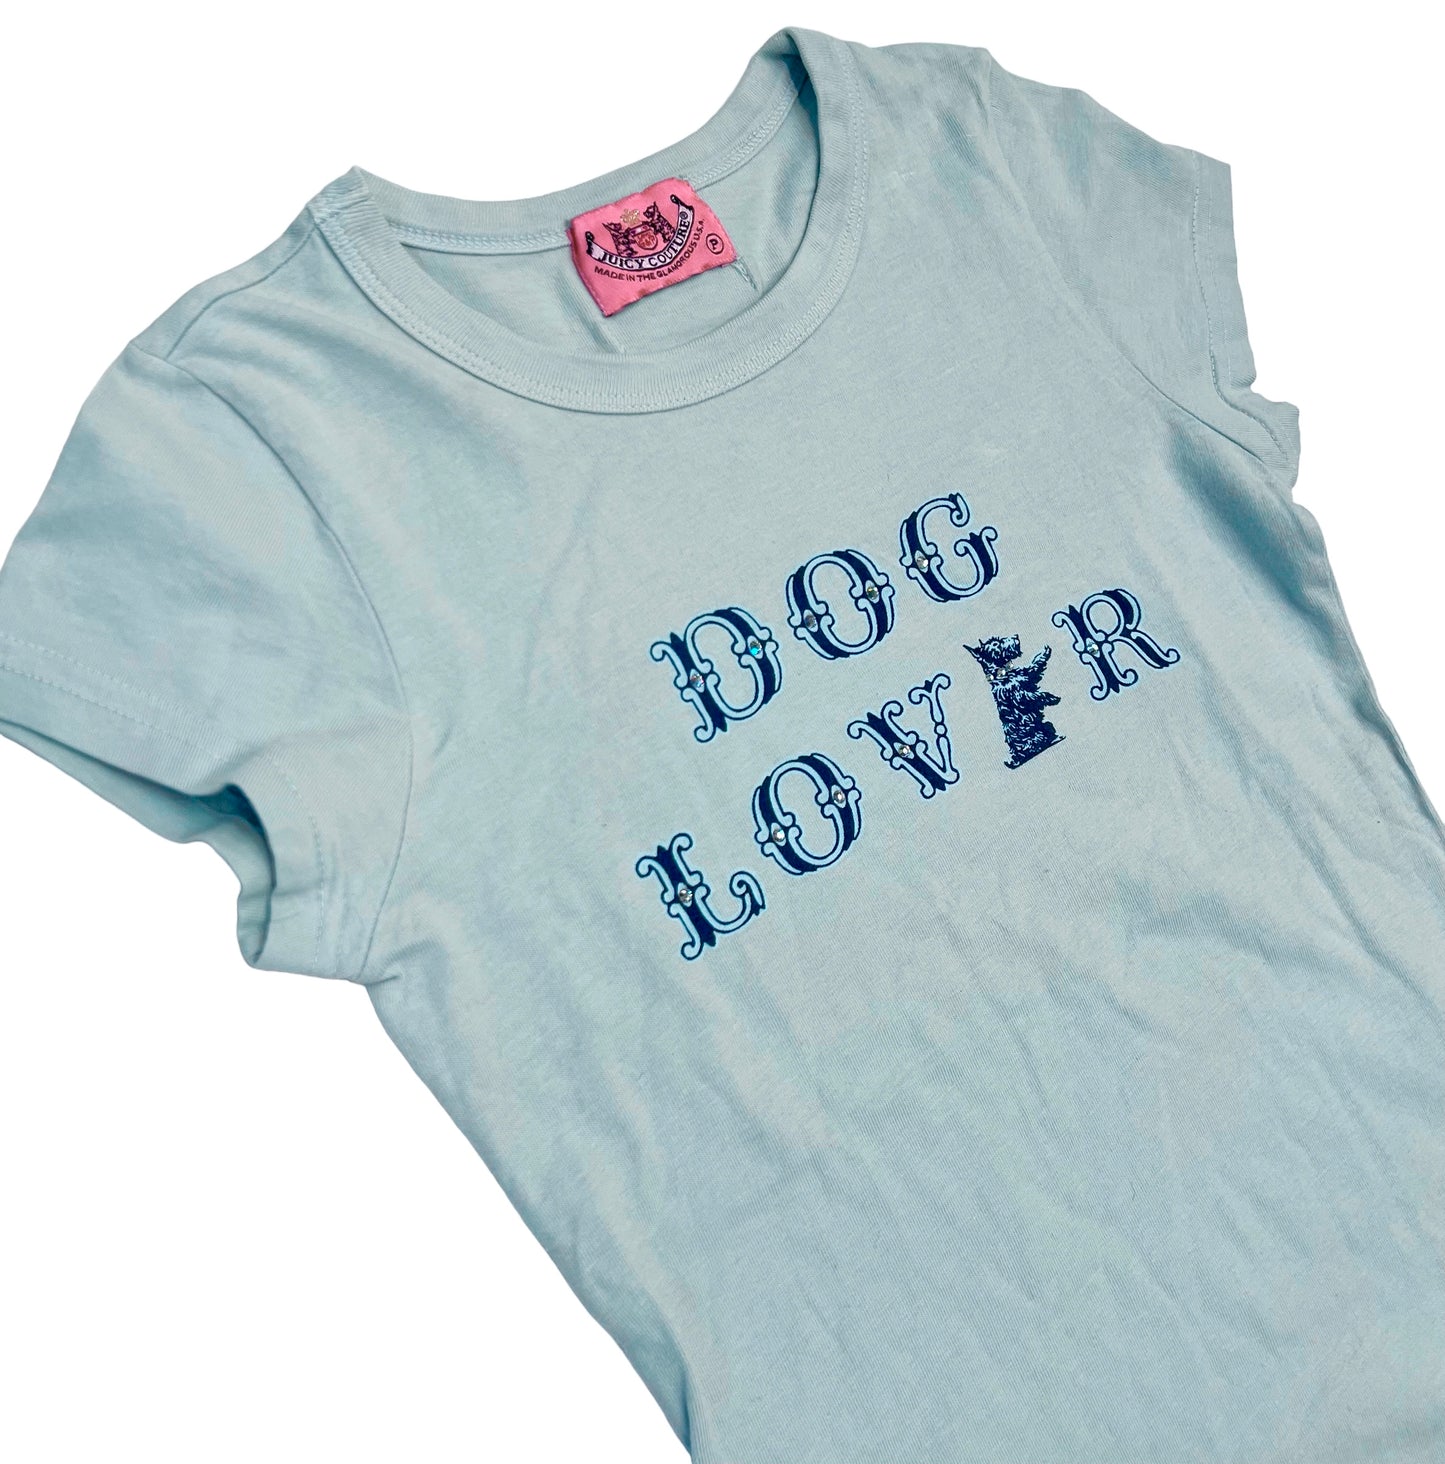 2000s Juicy Couture dog lover t-shirt